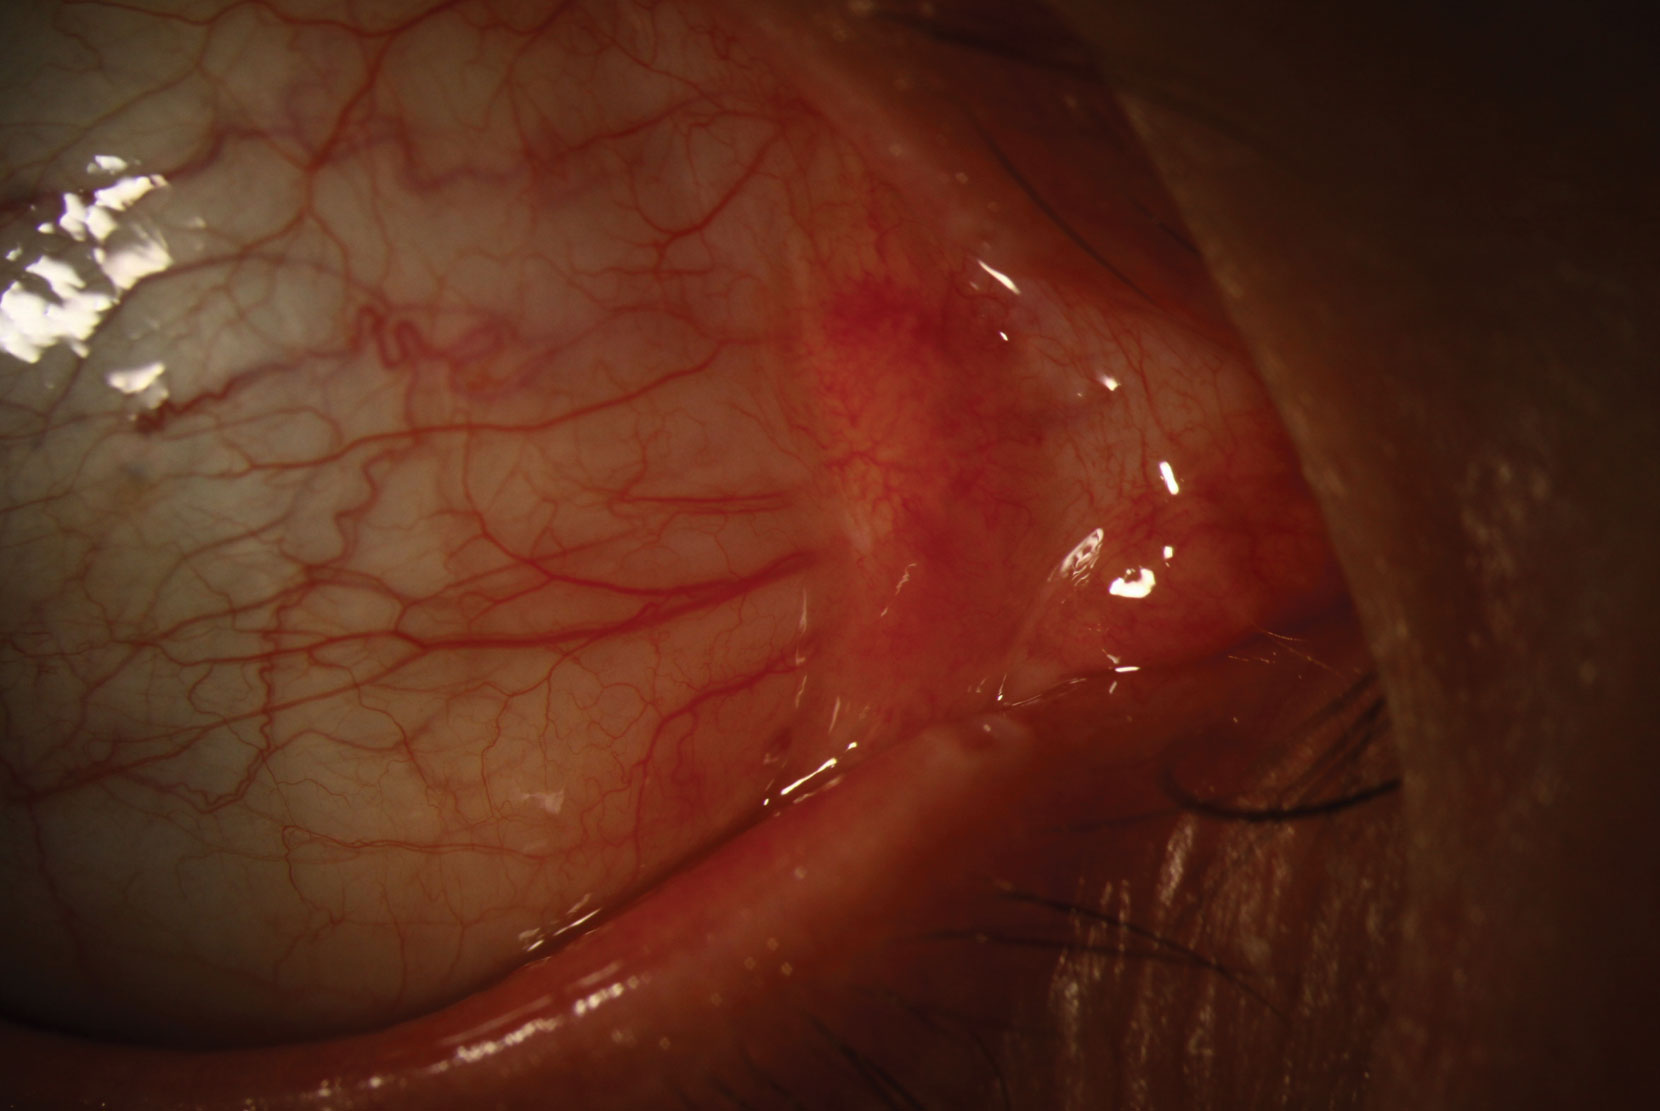 Scleritis is an inflammatory process that involves dilation of the superficial and deep episcleral vessels.